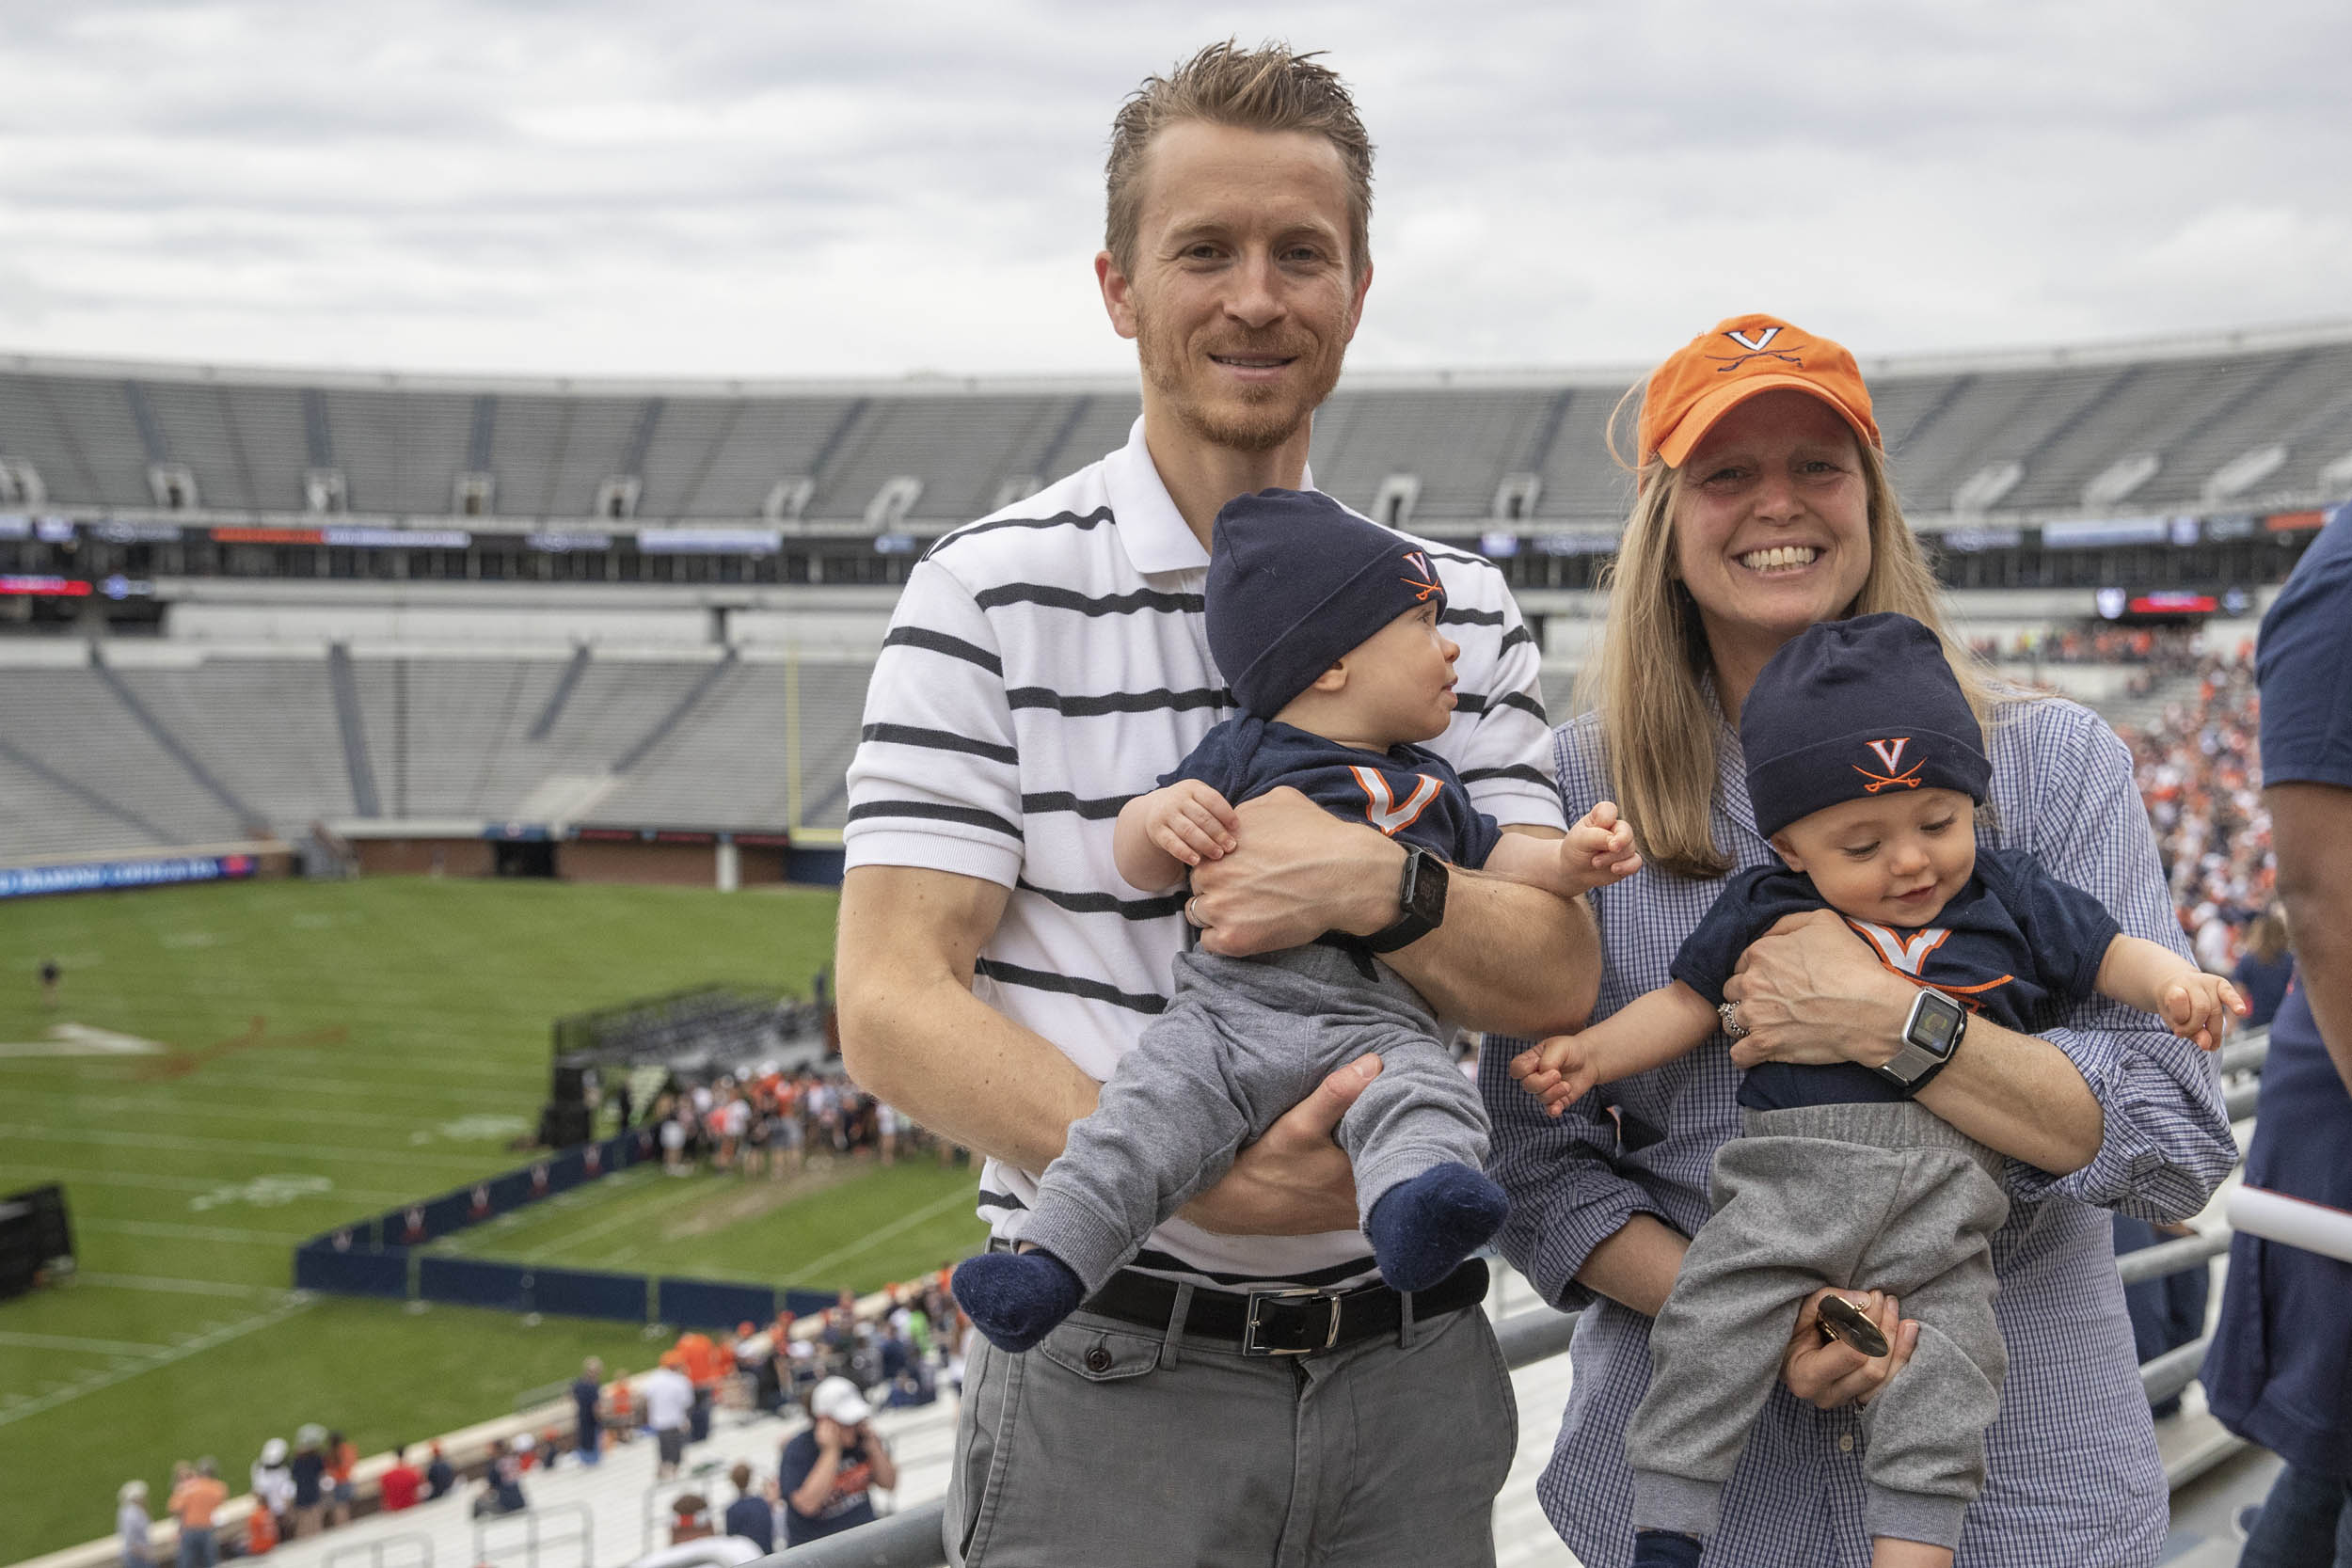 Twins William and James being held by their parents in Scott Stadium